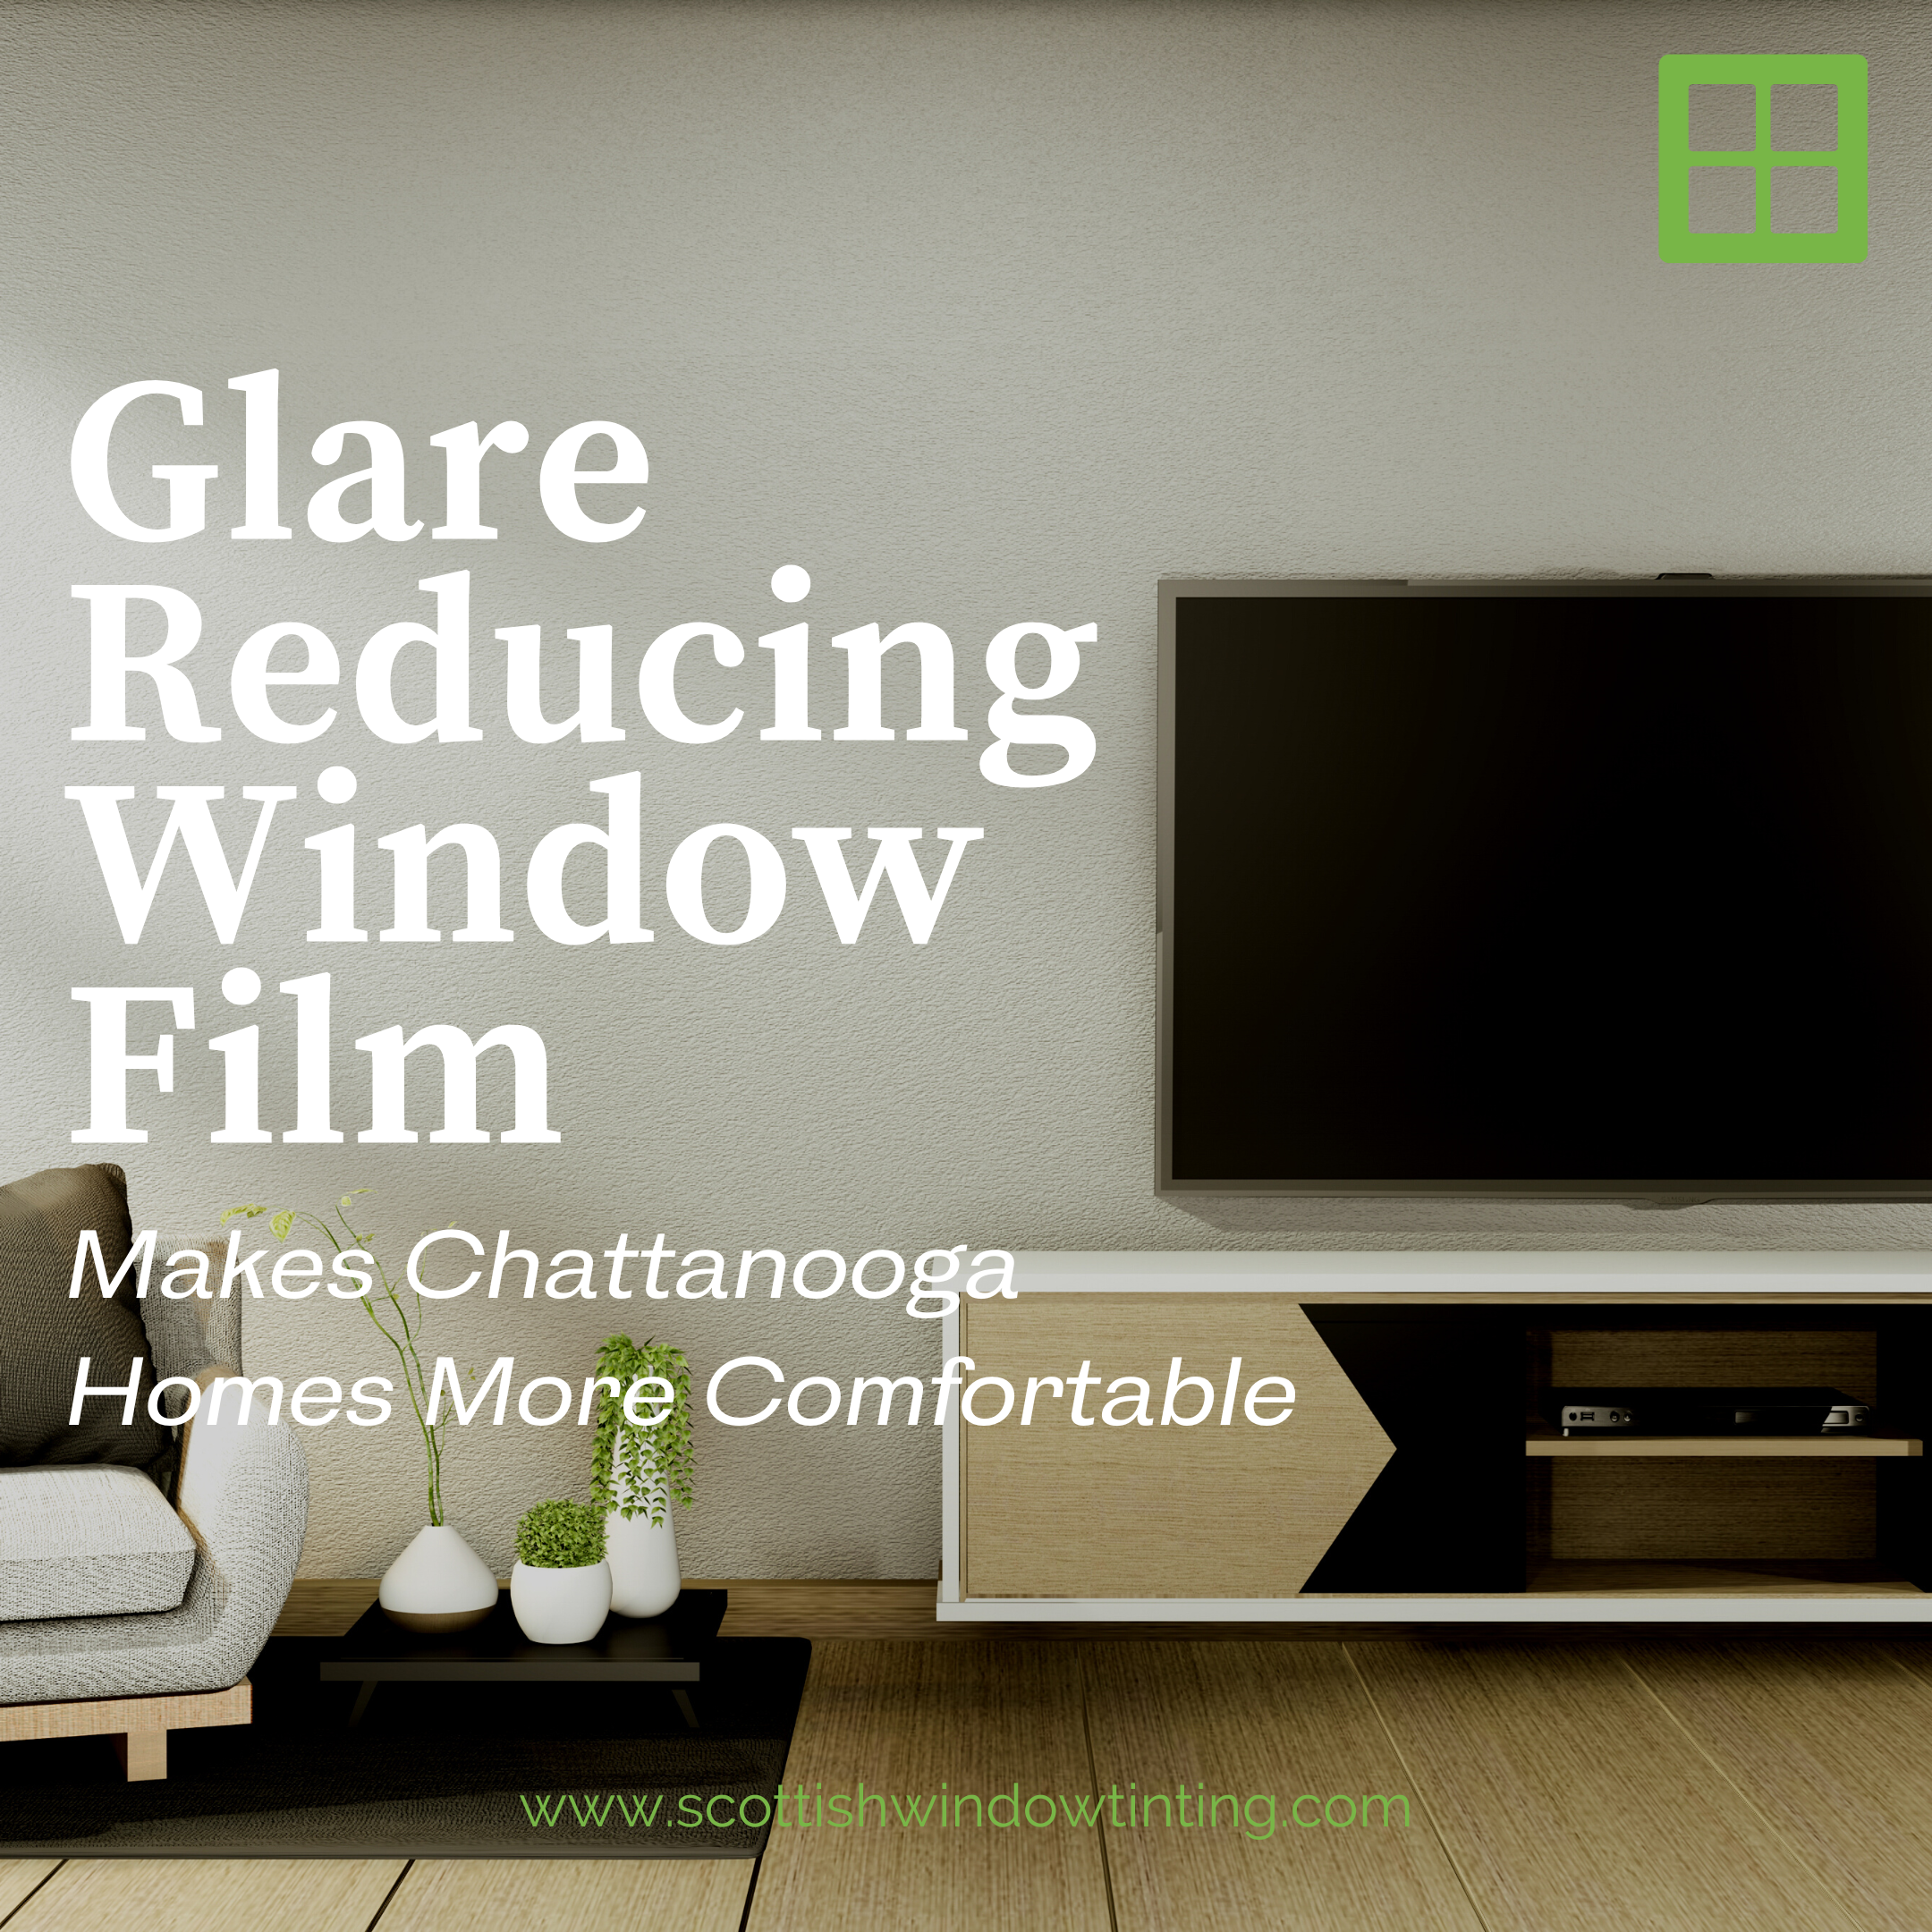 Glare Reducing Window Film Makes Chattanooga Homes More Comfortable